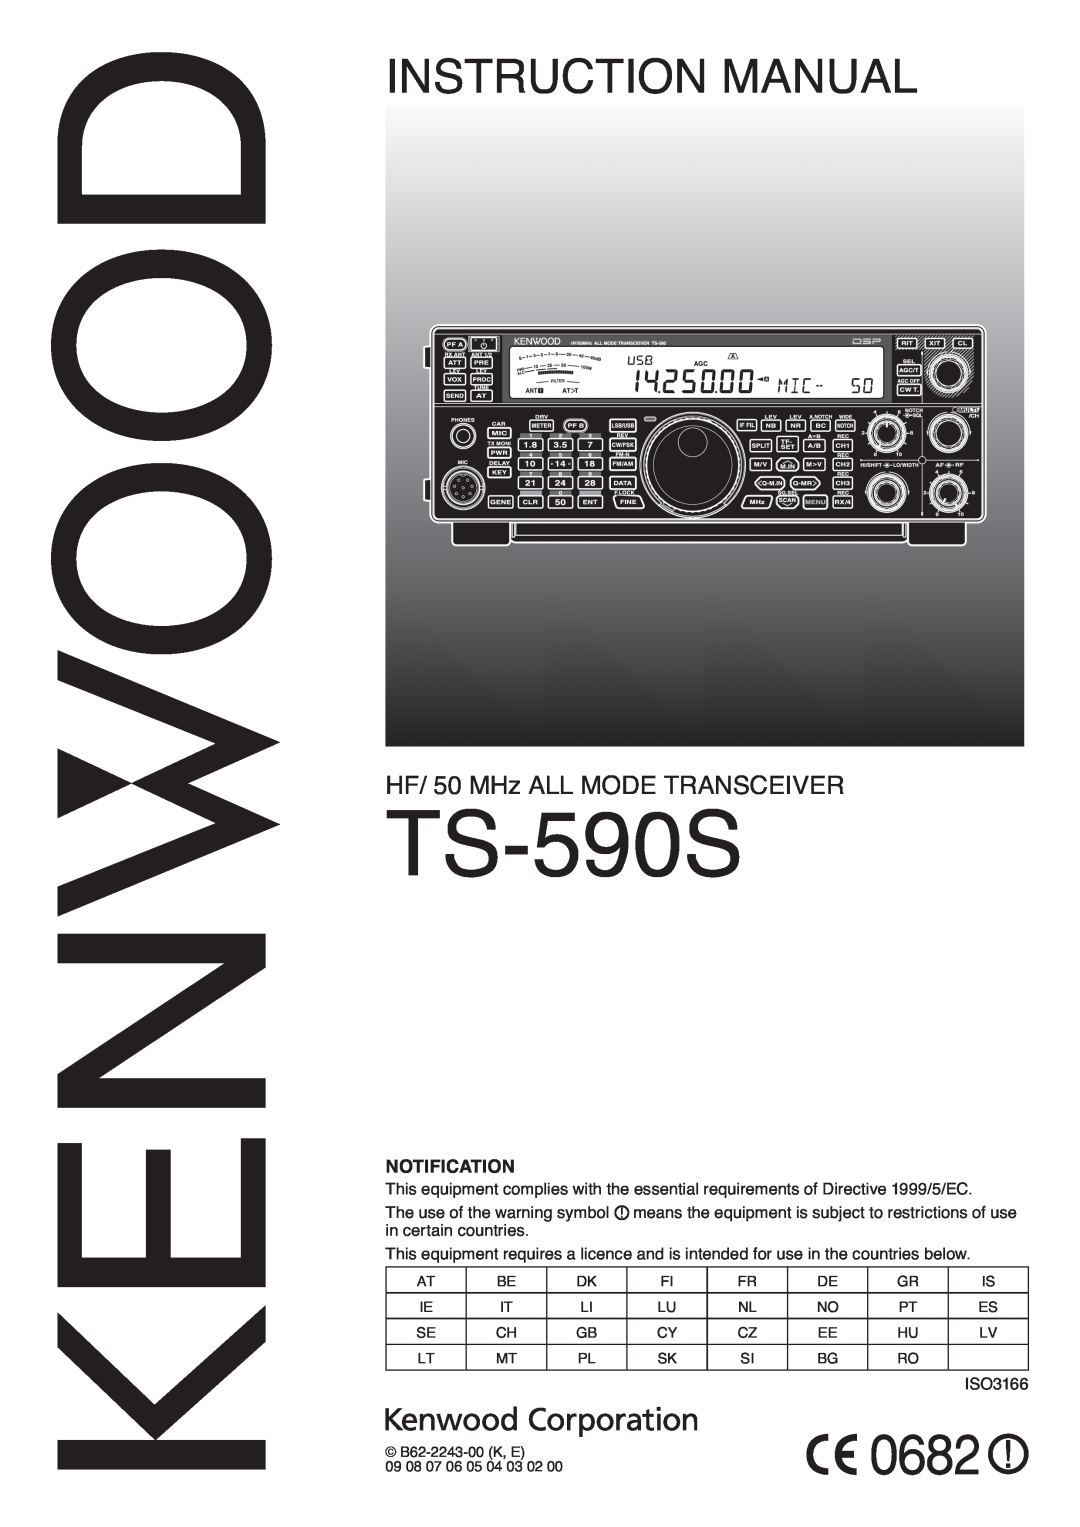 Kenwood TS-590S instruction manual Instruction Manual, HF/ 50 MHz ALL MODE TRANSCEIVER, ISO3166 